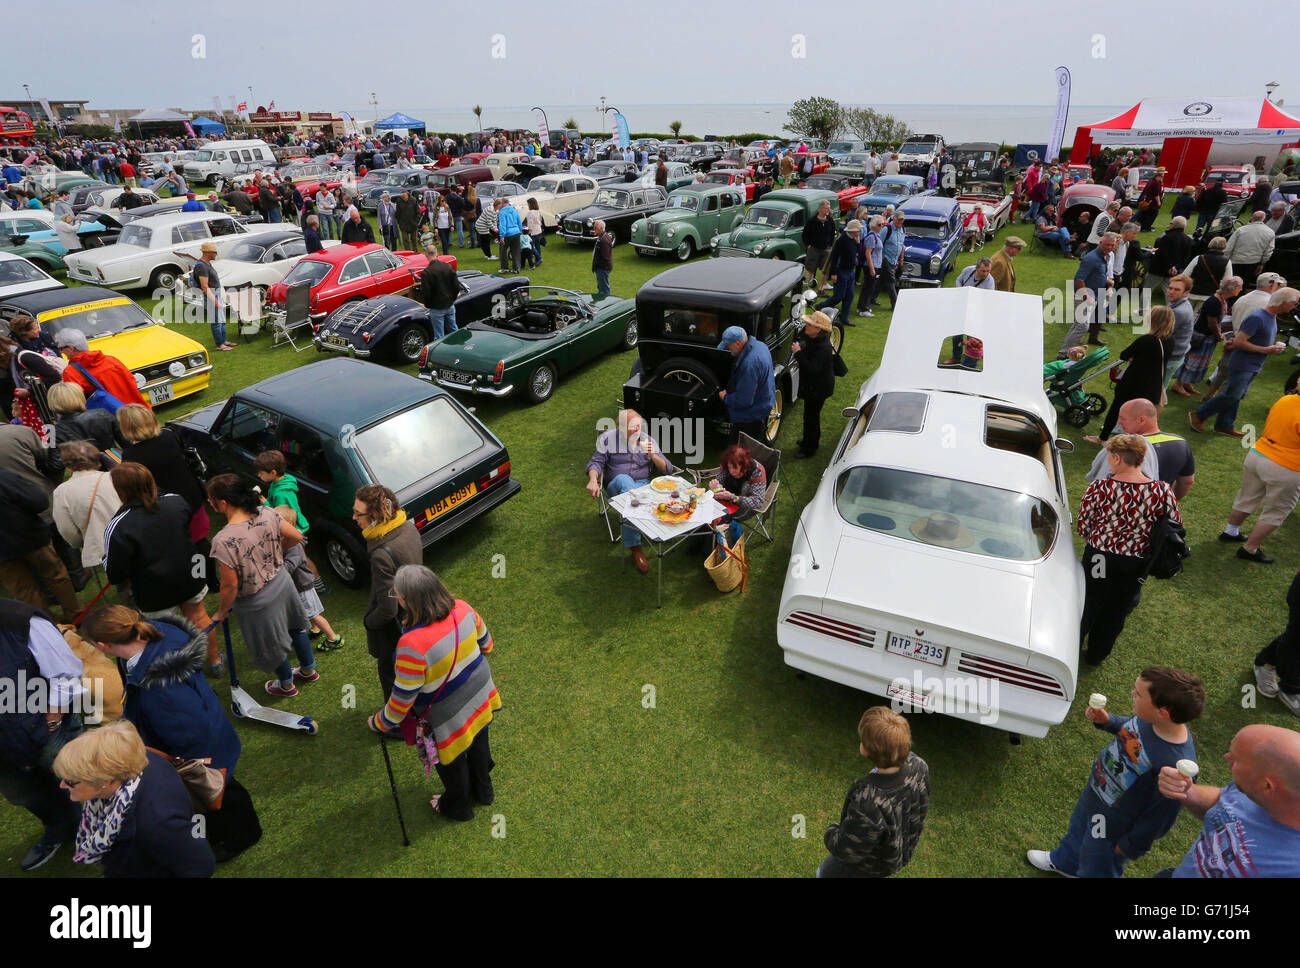 A couple picnic in the fine weather next to their classic car in Eastbourne, Sussex, during the second day of Magnificent Motors, as around 600 vintage and classic vehicles take part in the largest free motoring spectacular on the south coast. Stock Photo